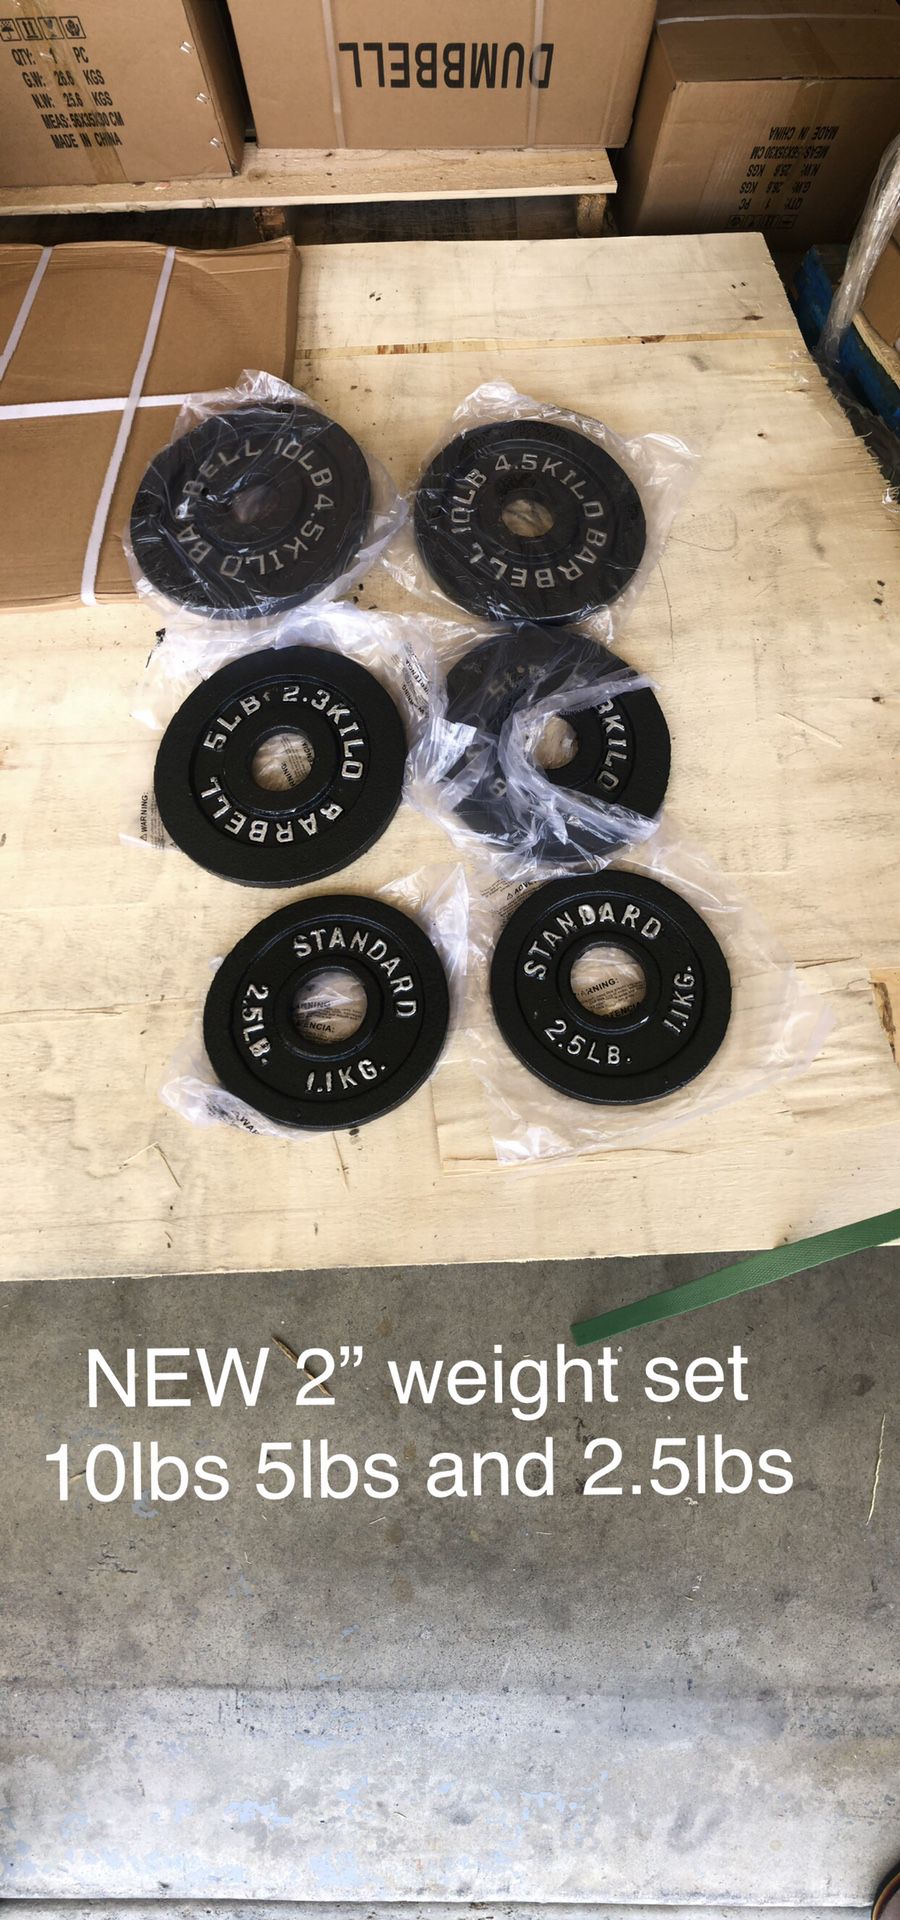 New olympic weight set 10lb 5lb 2.5lbs small weights iron plates NEW 2” holes